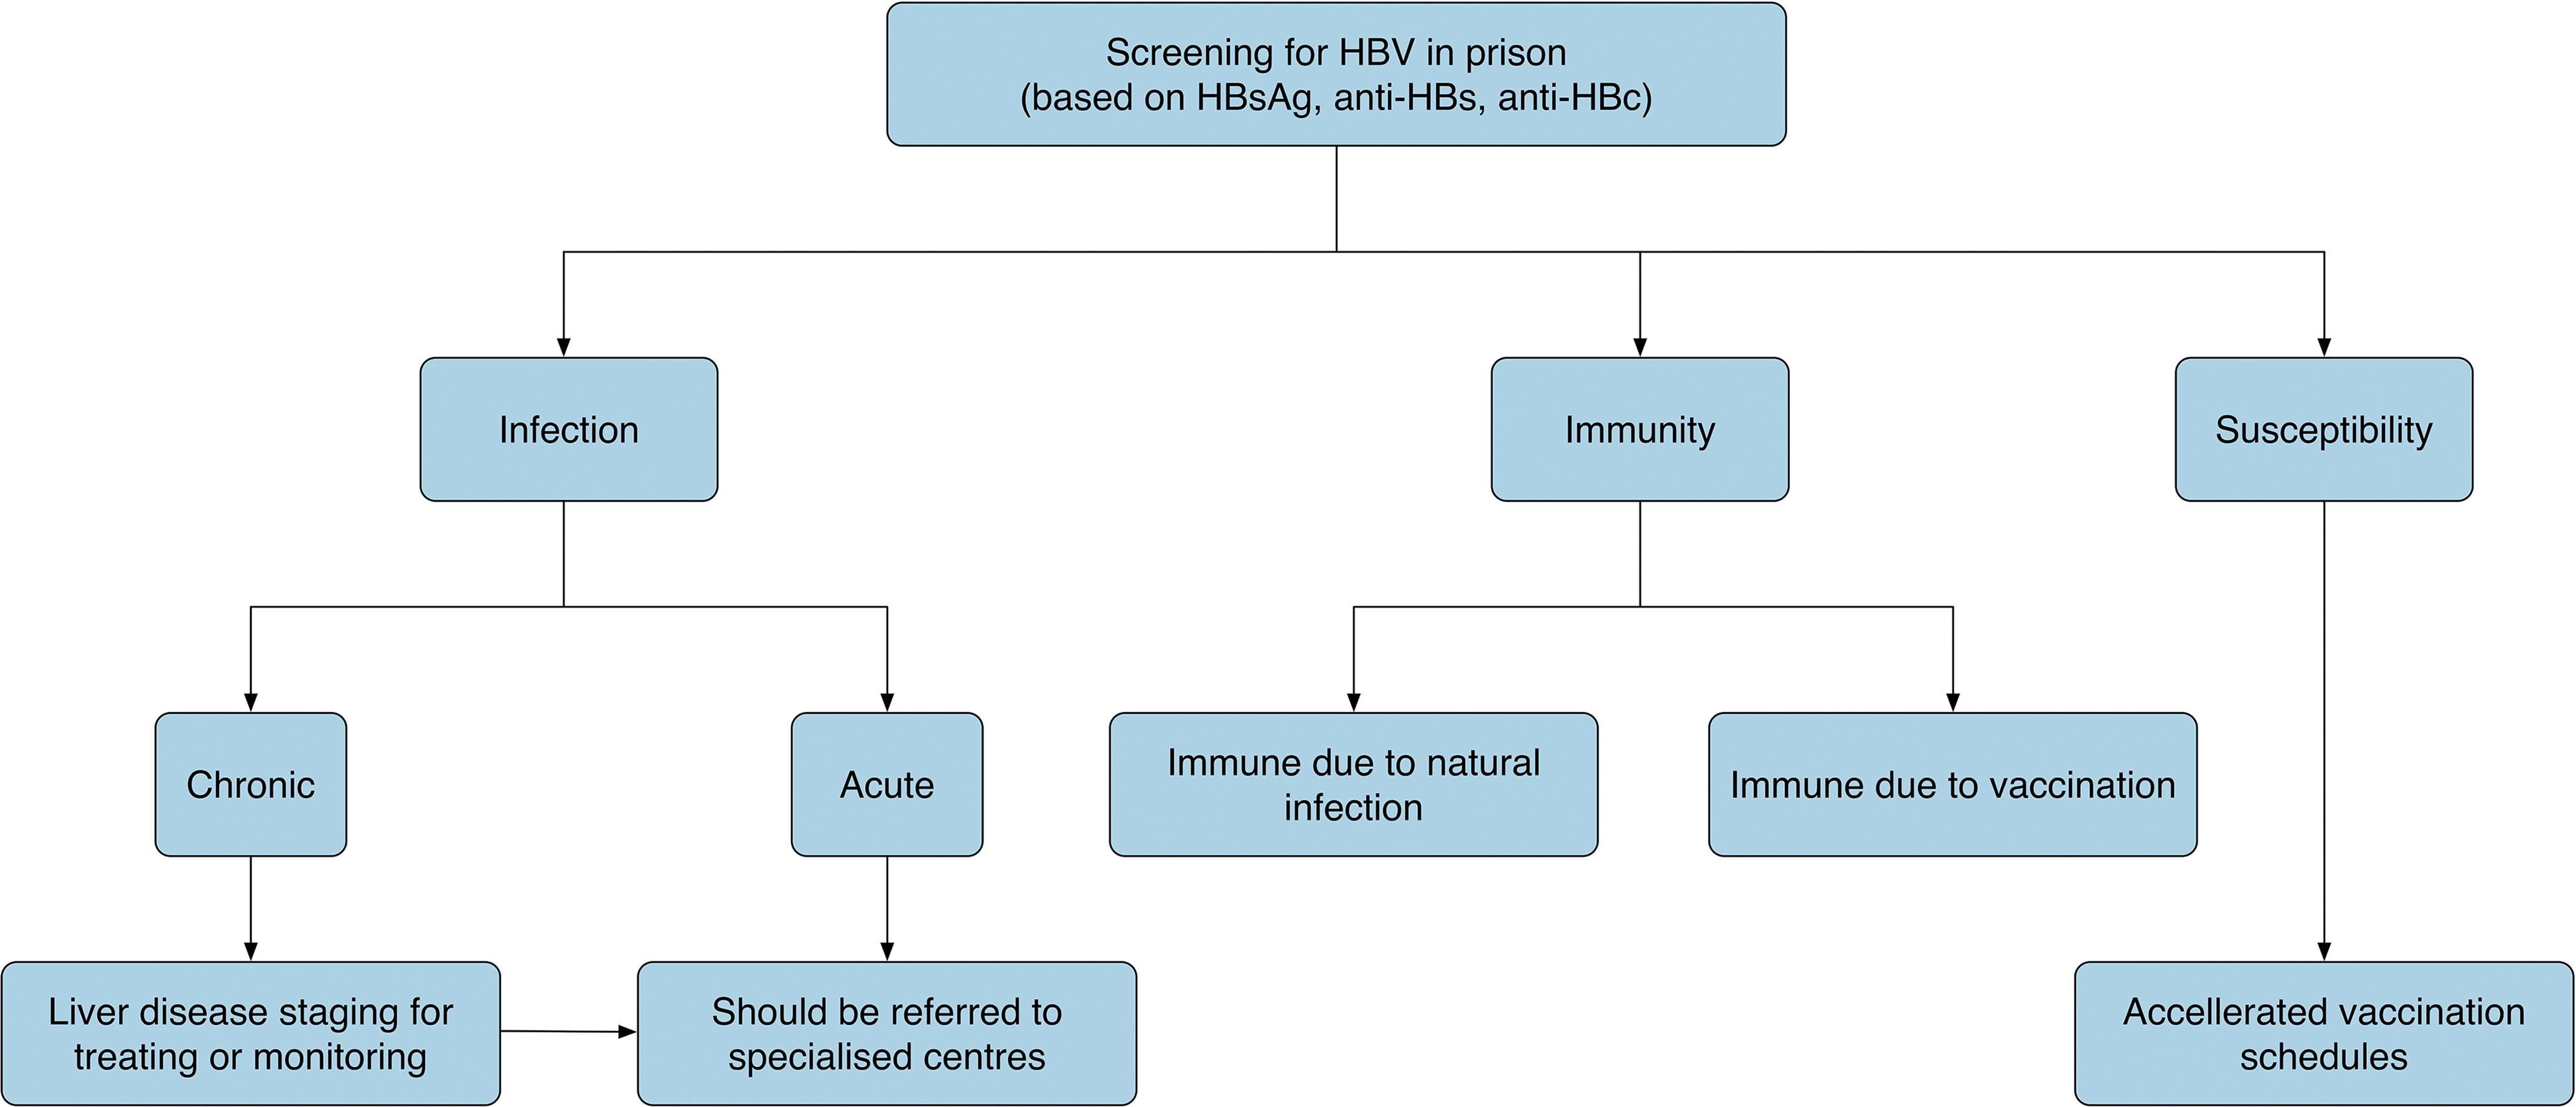 Proposed algorithm after screening for HBV infection in prisoners.